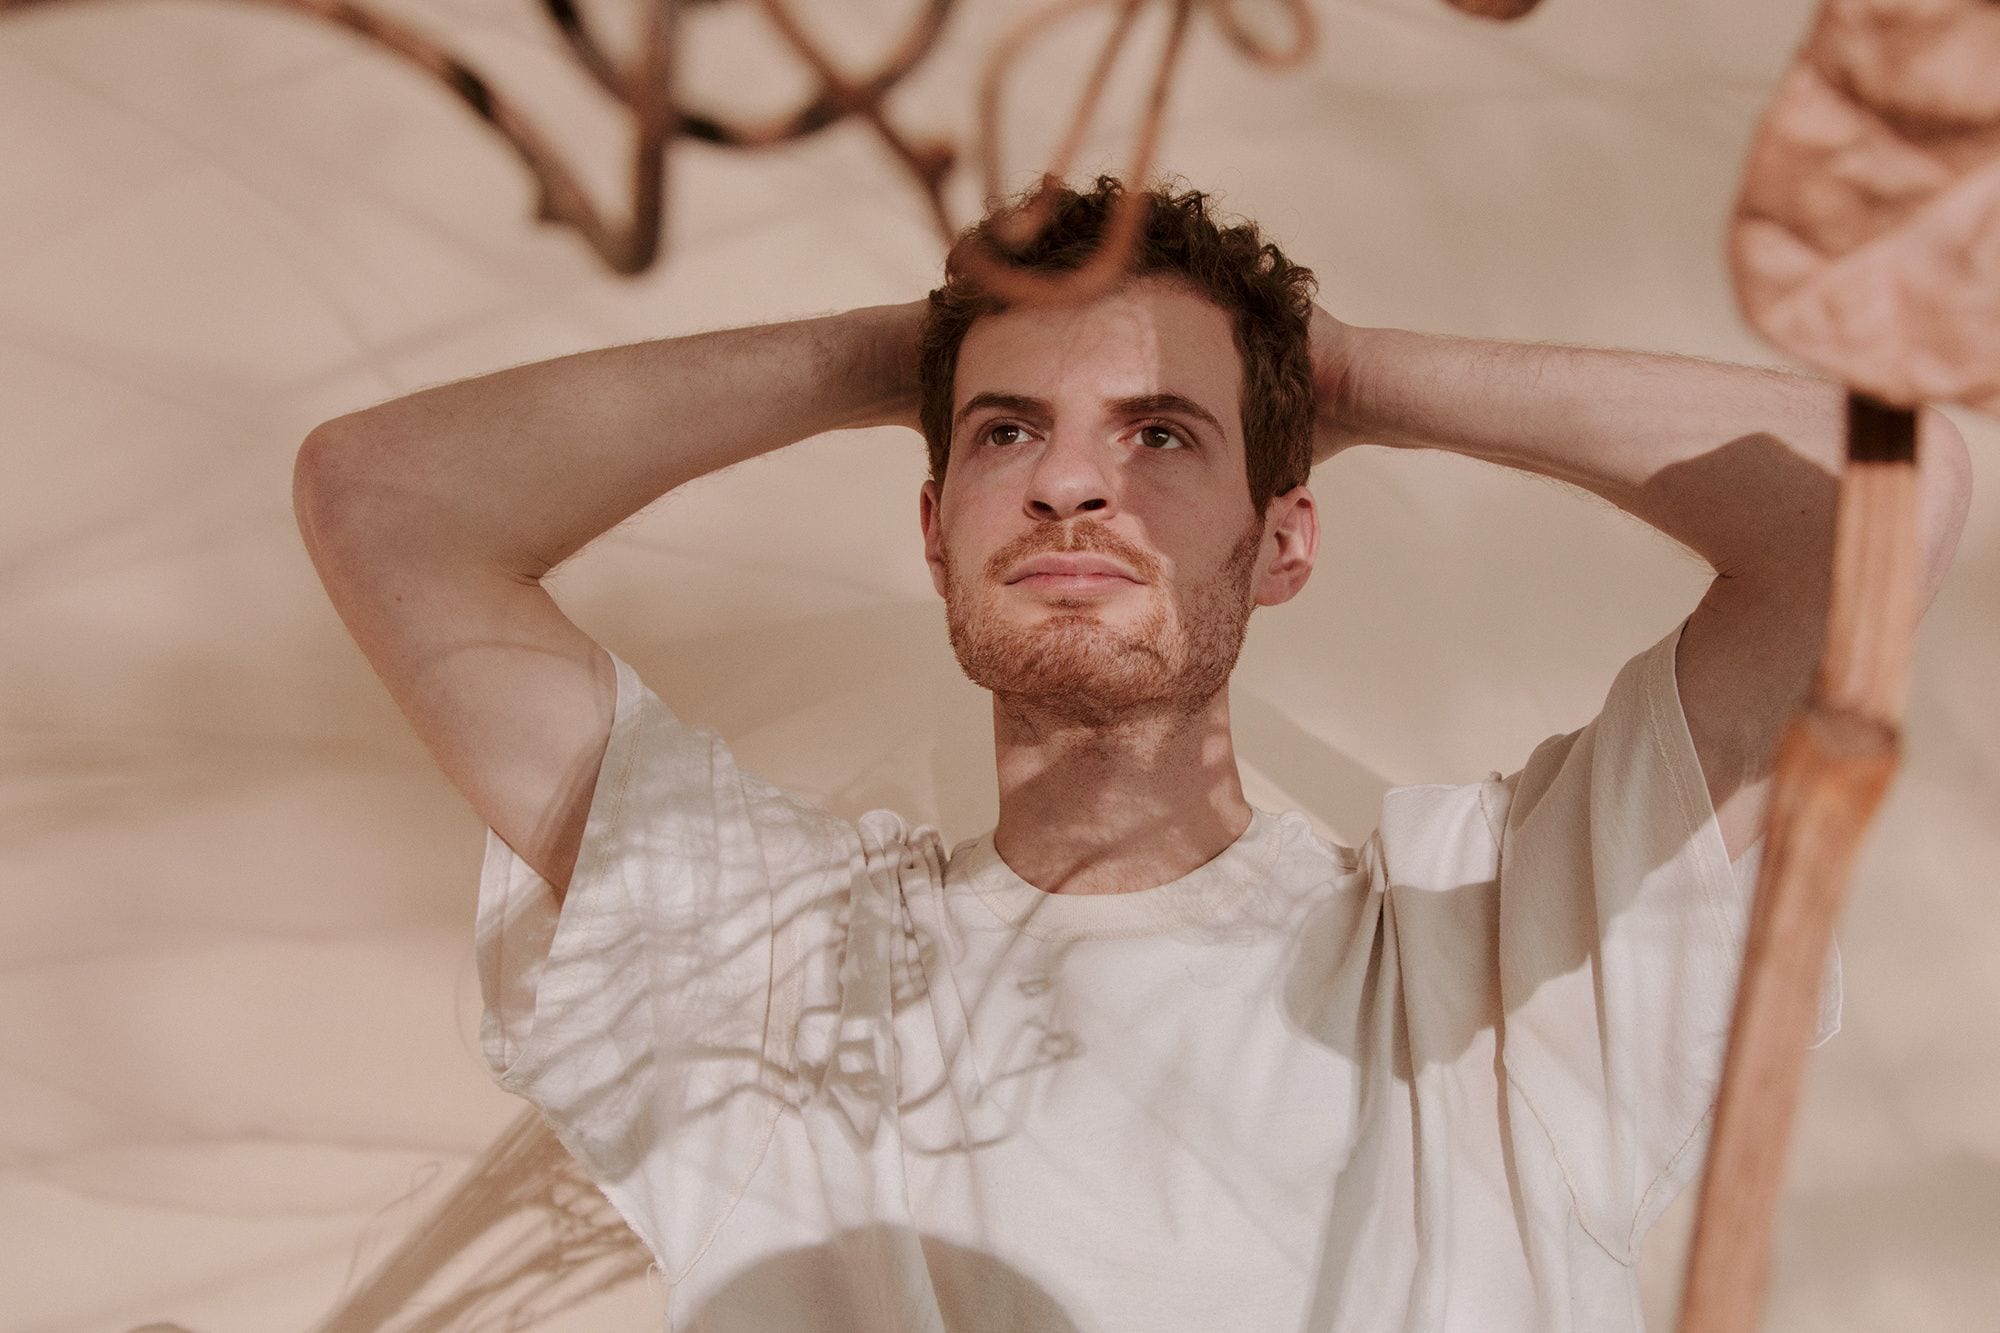 Photay’s New Electronic LP ‘Waking Hours’ Is About Taking Time Out